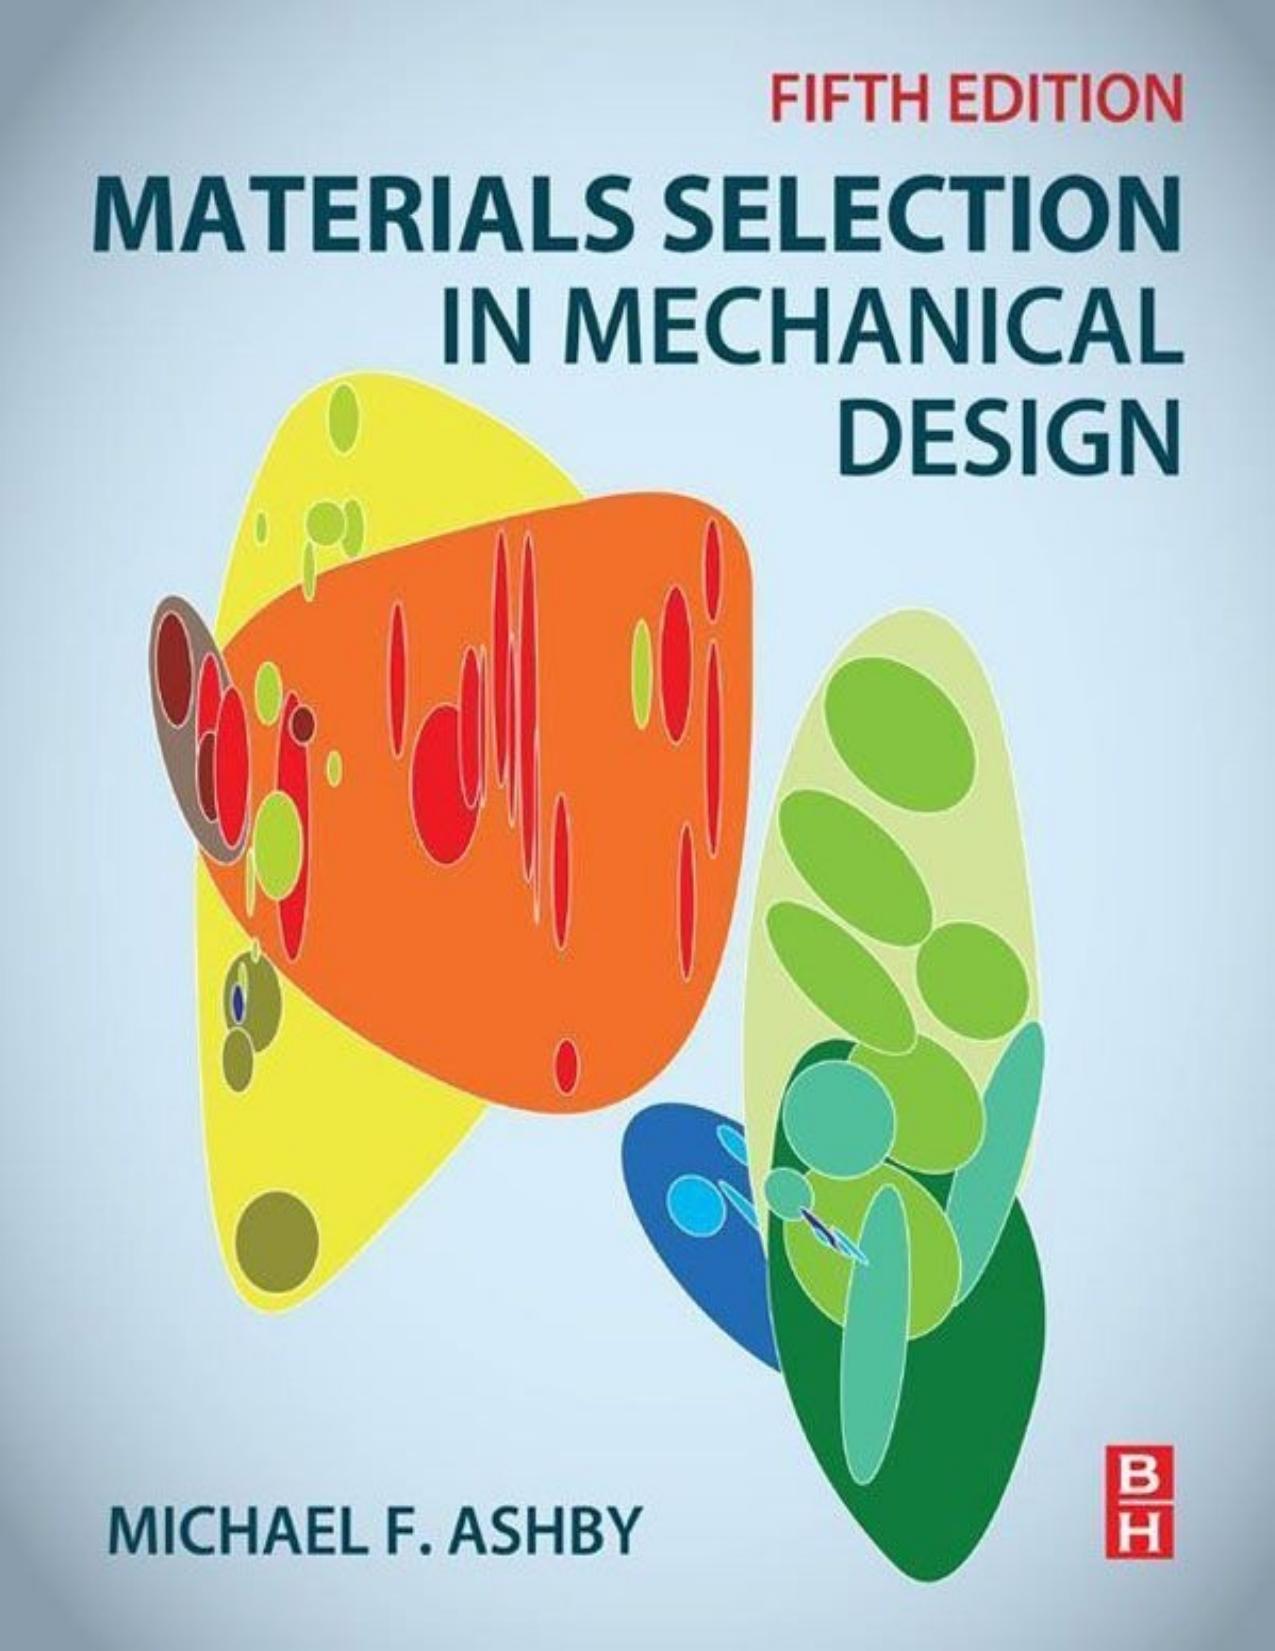 Materials Selection in Mechanical Design 5th Edition by Michael F. Ashby - Michael F. Ashby.jpg